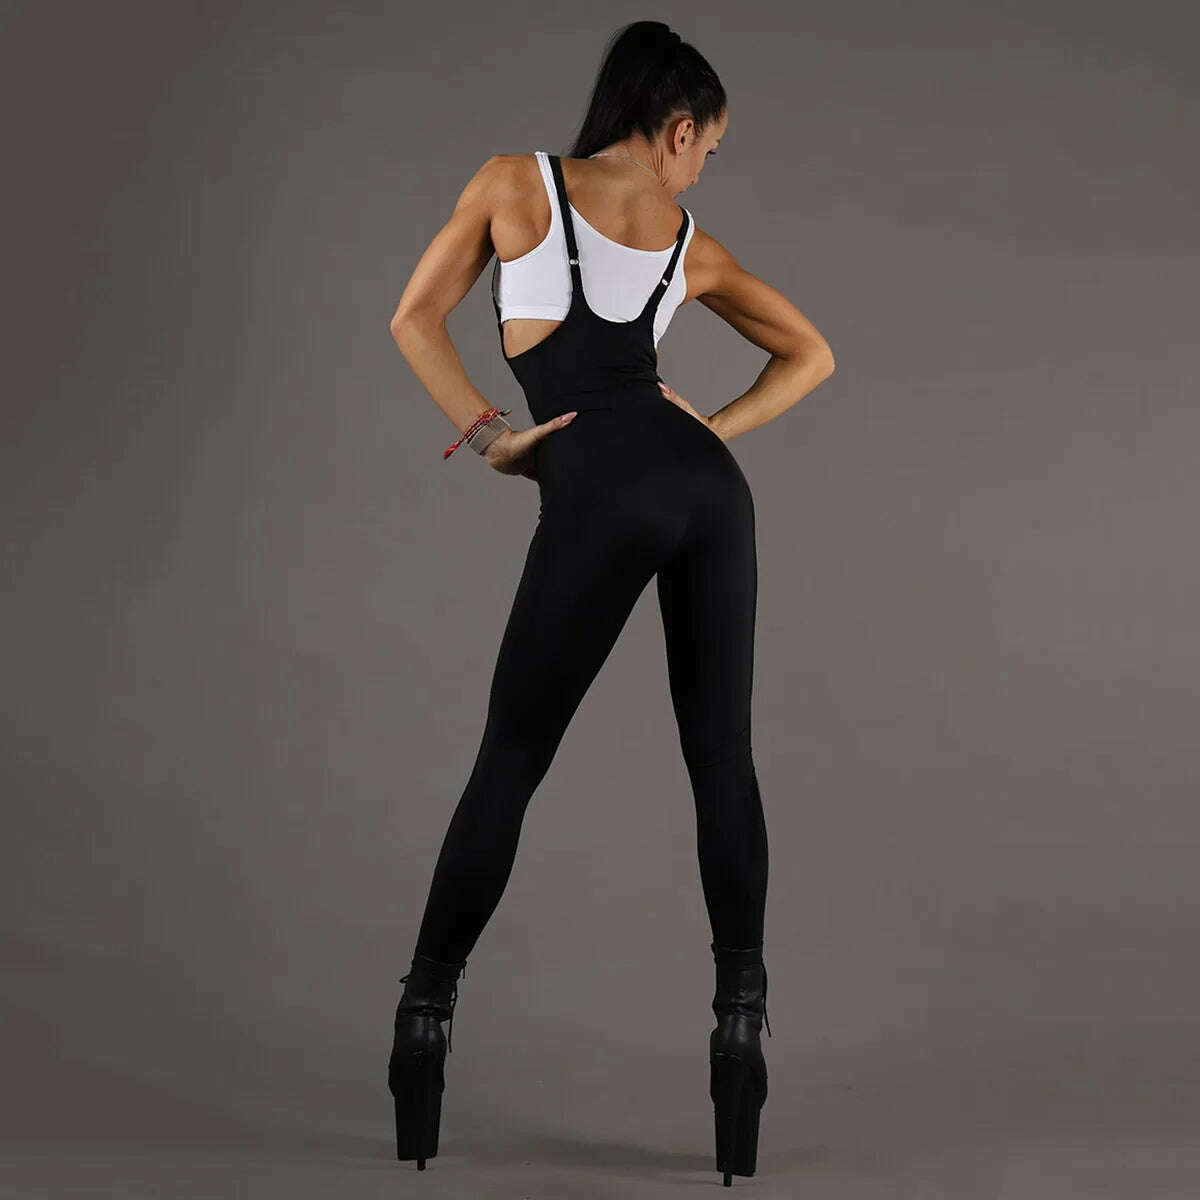 KIMLUD, Oshoplive Solid Color Wrap Spaghetti-Neck Backless Jump Suits for Women Going Out Backless Fitness Sexy Sports Ladies Jumpsuits, KIMLUD Women's Clothes